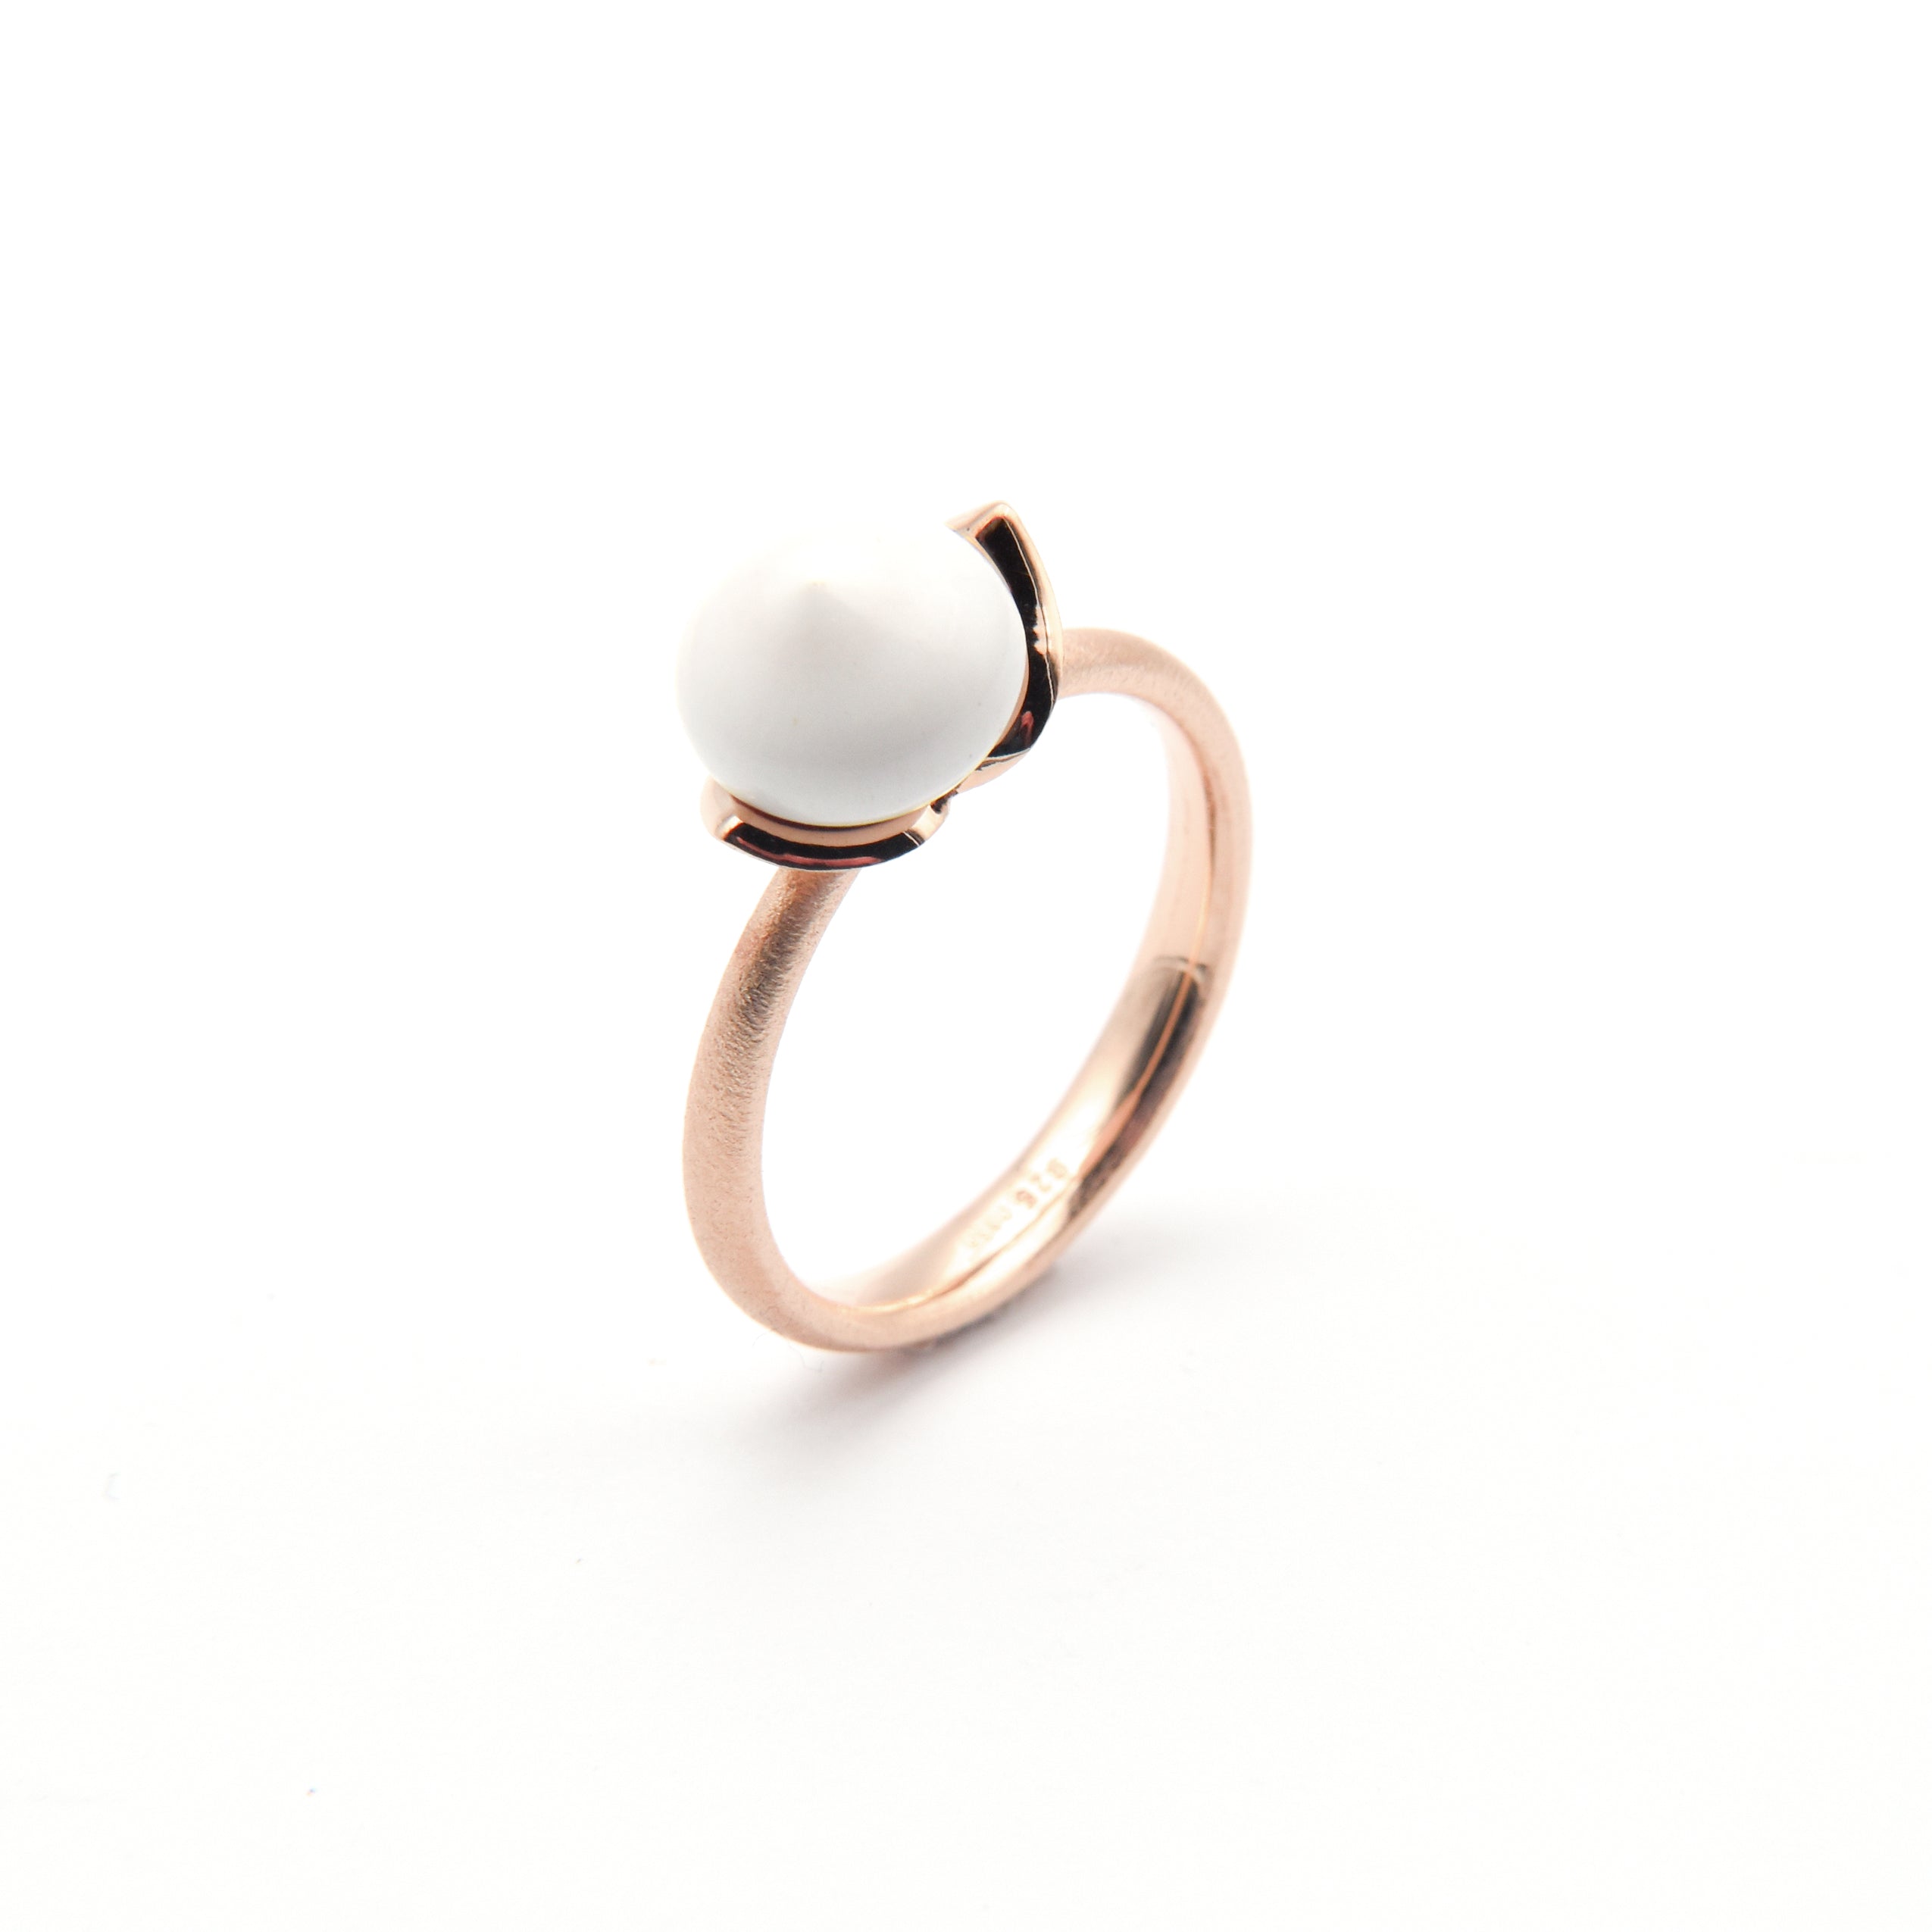 Dolce Ring "smal" mit Kascholong 925/-